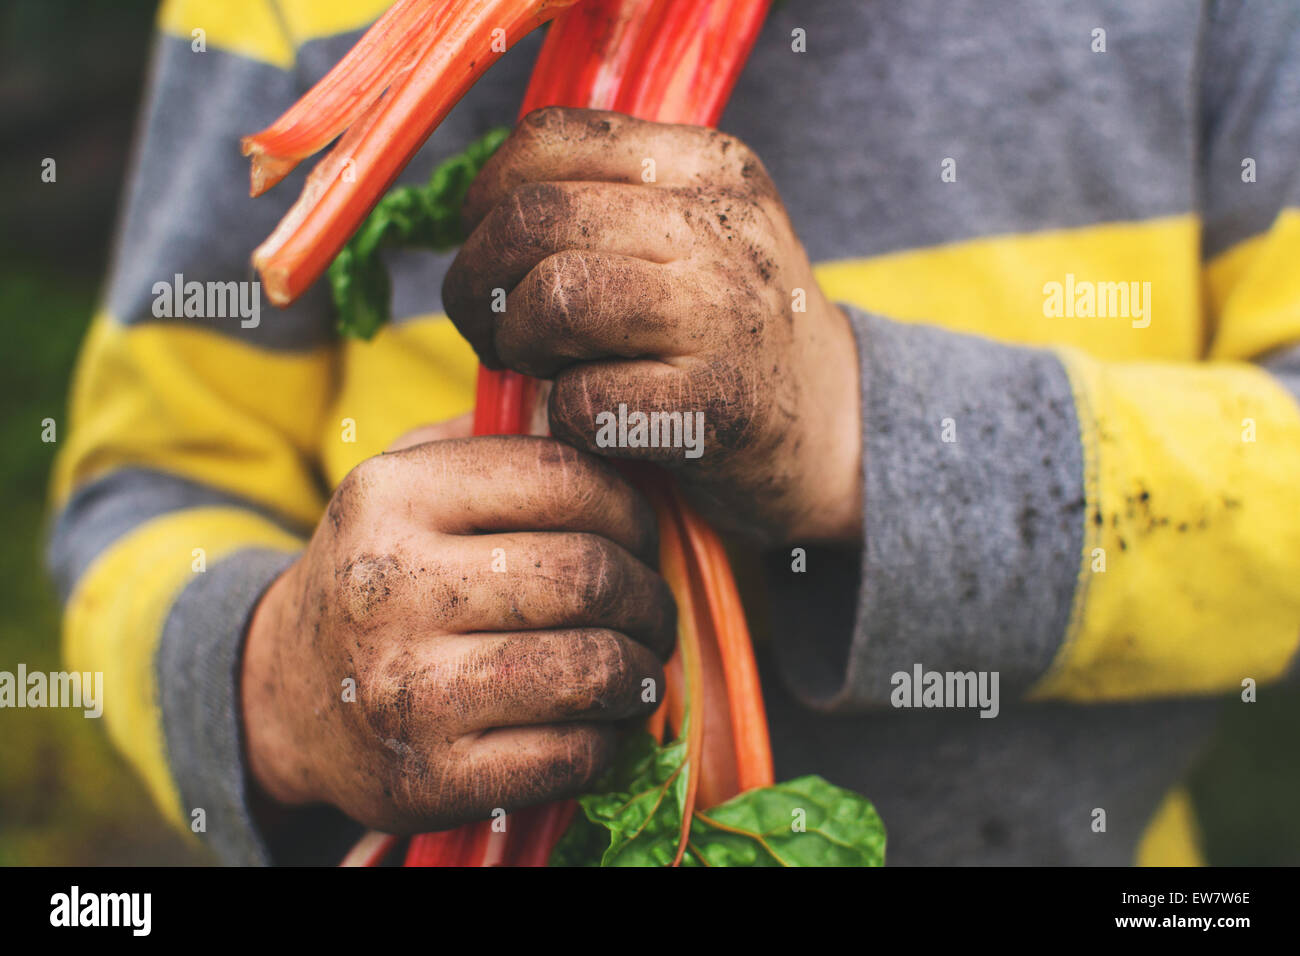 Boy with dirty hands holding freshly picked swiss chard Stock Photo